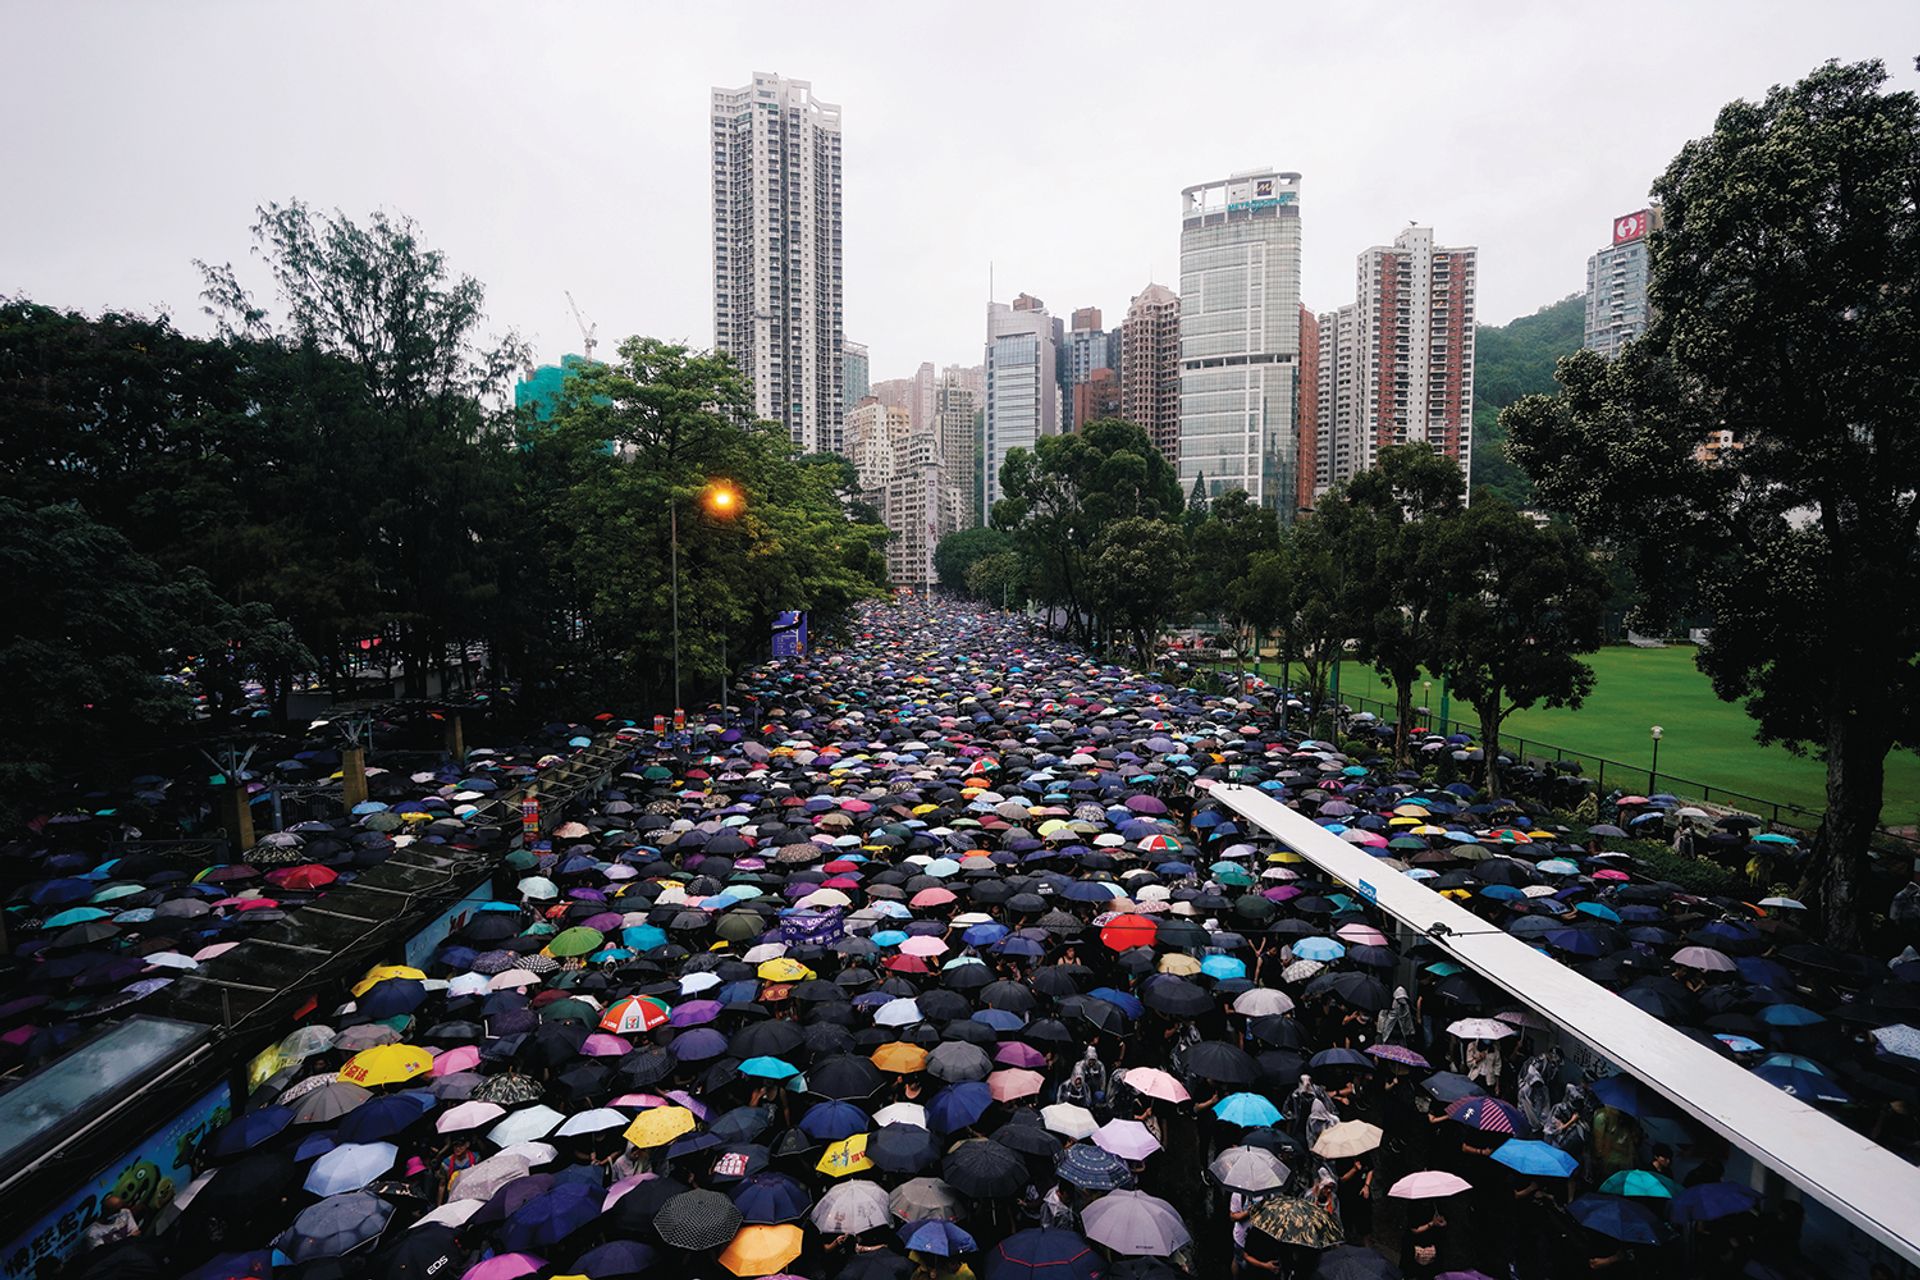 Weekend demonstrations have been taking place in Hong Kong since June, with protestors calling for the scrapping of a controversial extradition bill © Reuters/Aly Song